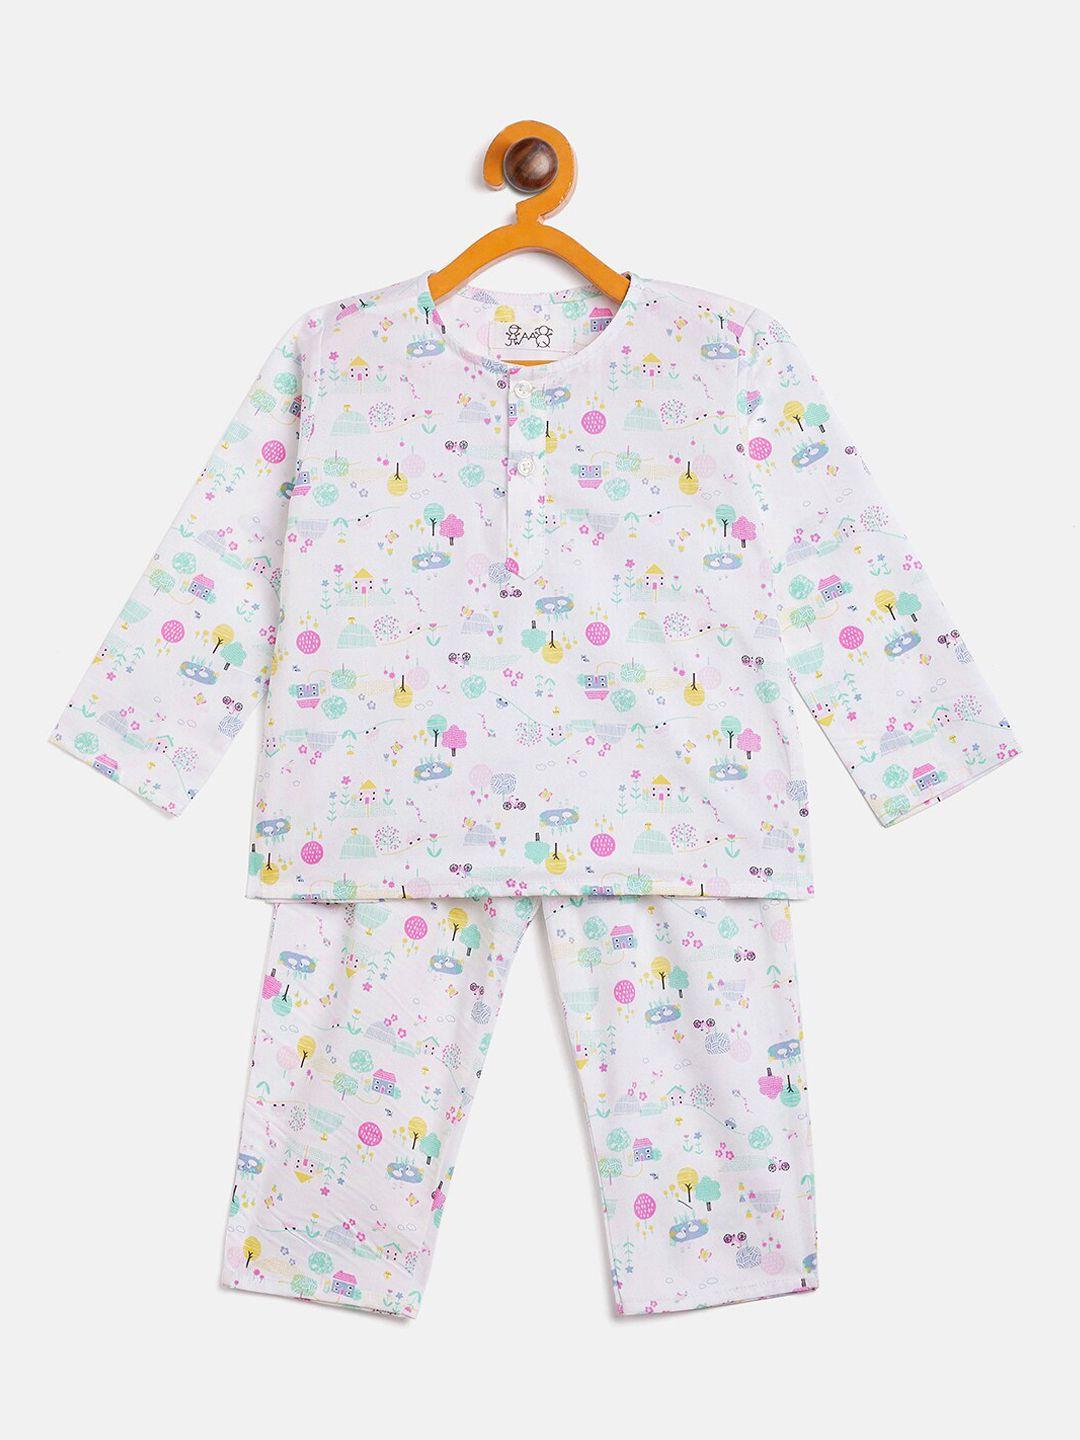 jwaaq infant kids graphic printed pure cotton night suit